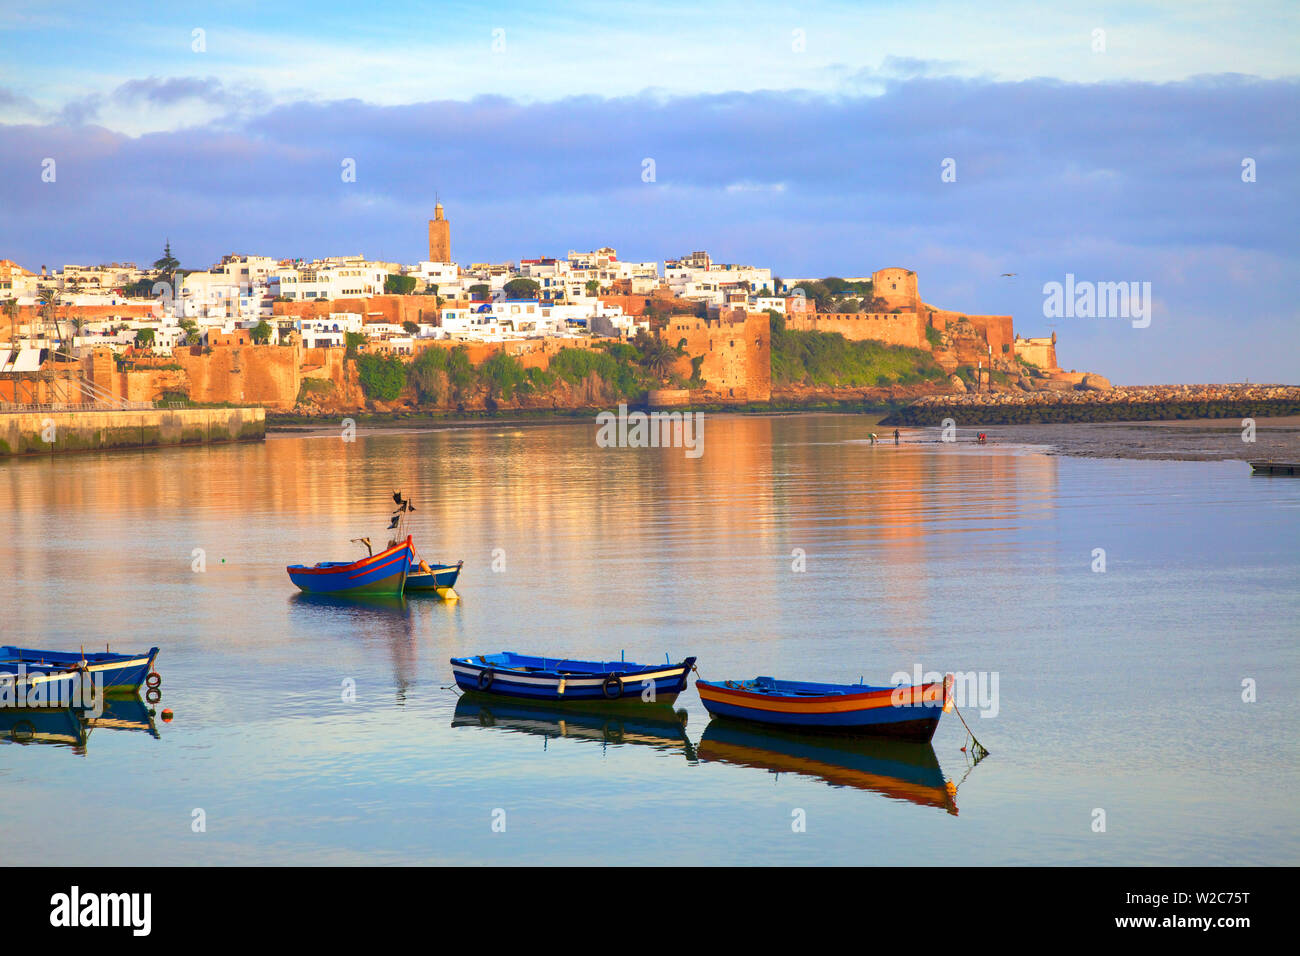 Harbour and Fishing Boats with Oudaia Kasbah and Coastline in Background, Rabat, Morocco, North Africa Stock Photo